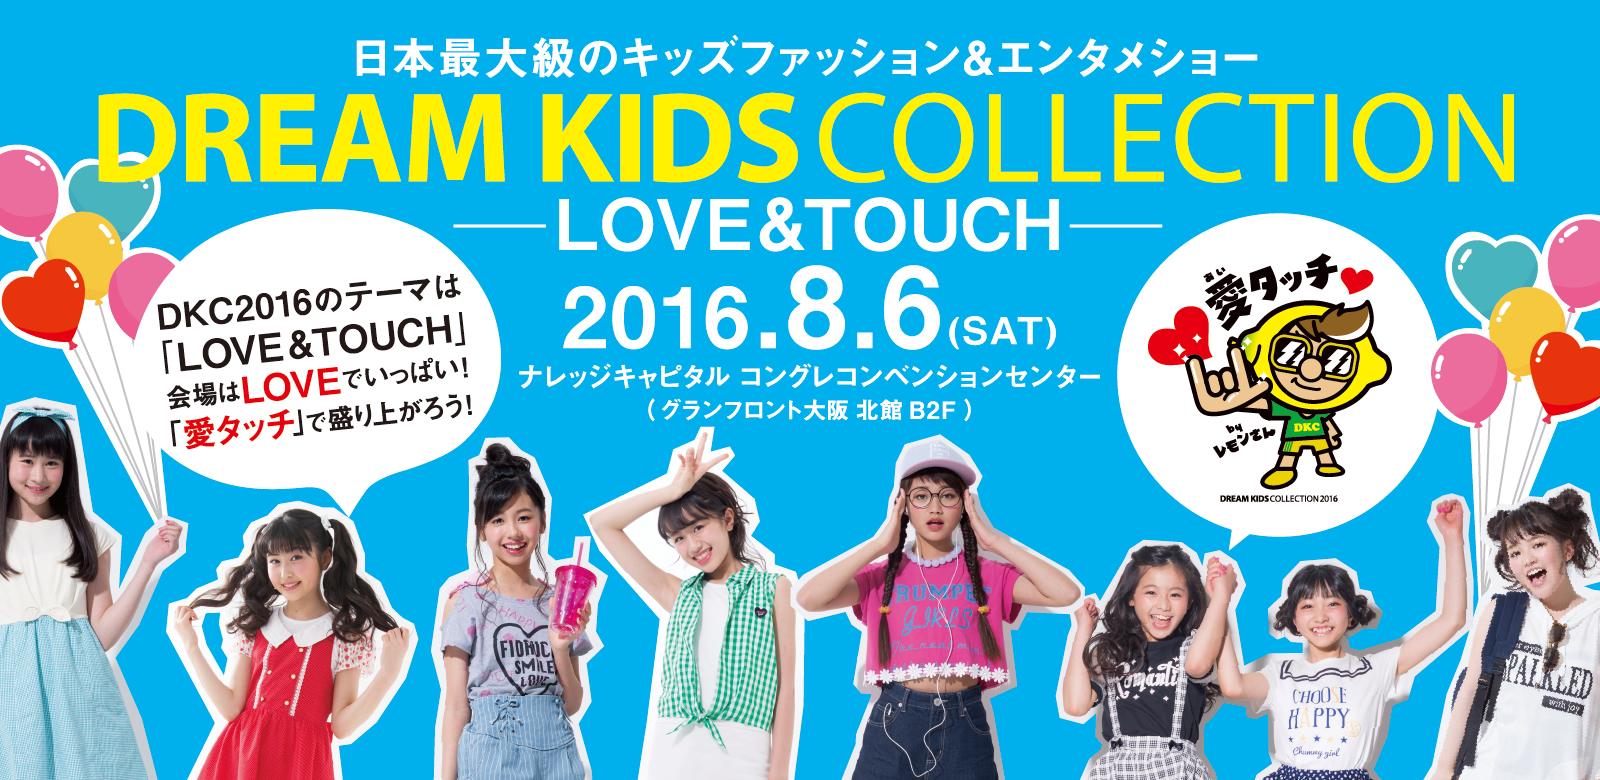 DREAM KIDS Collection 2016 -LOVE&TOUCH-